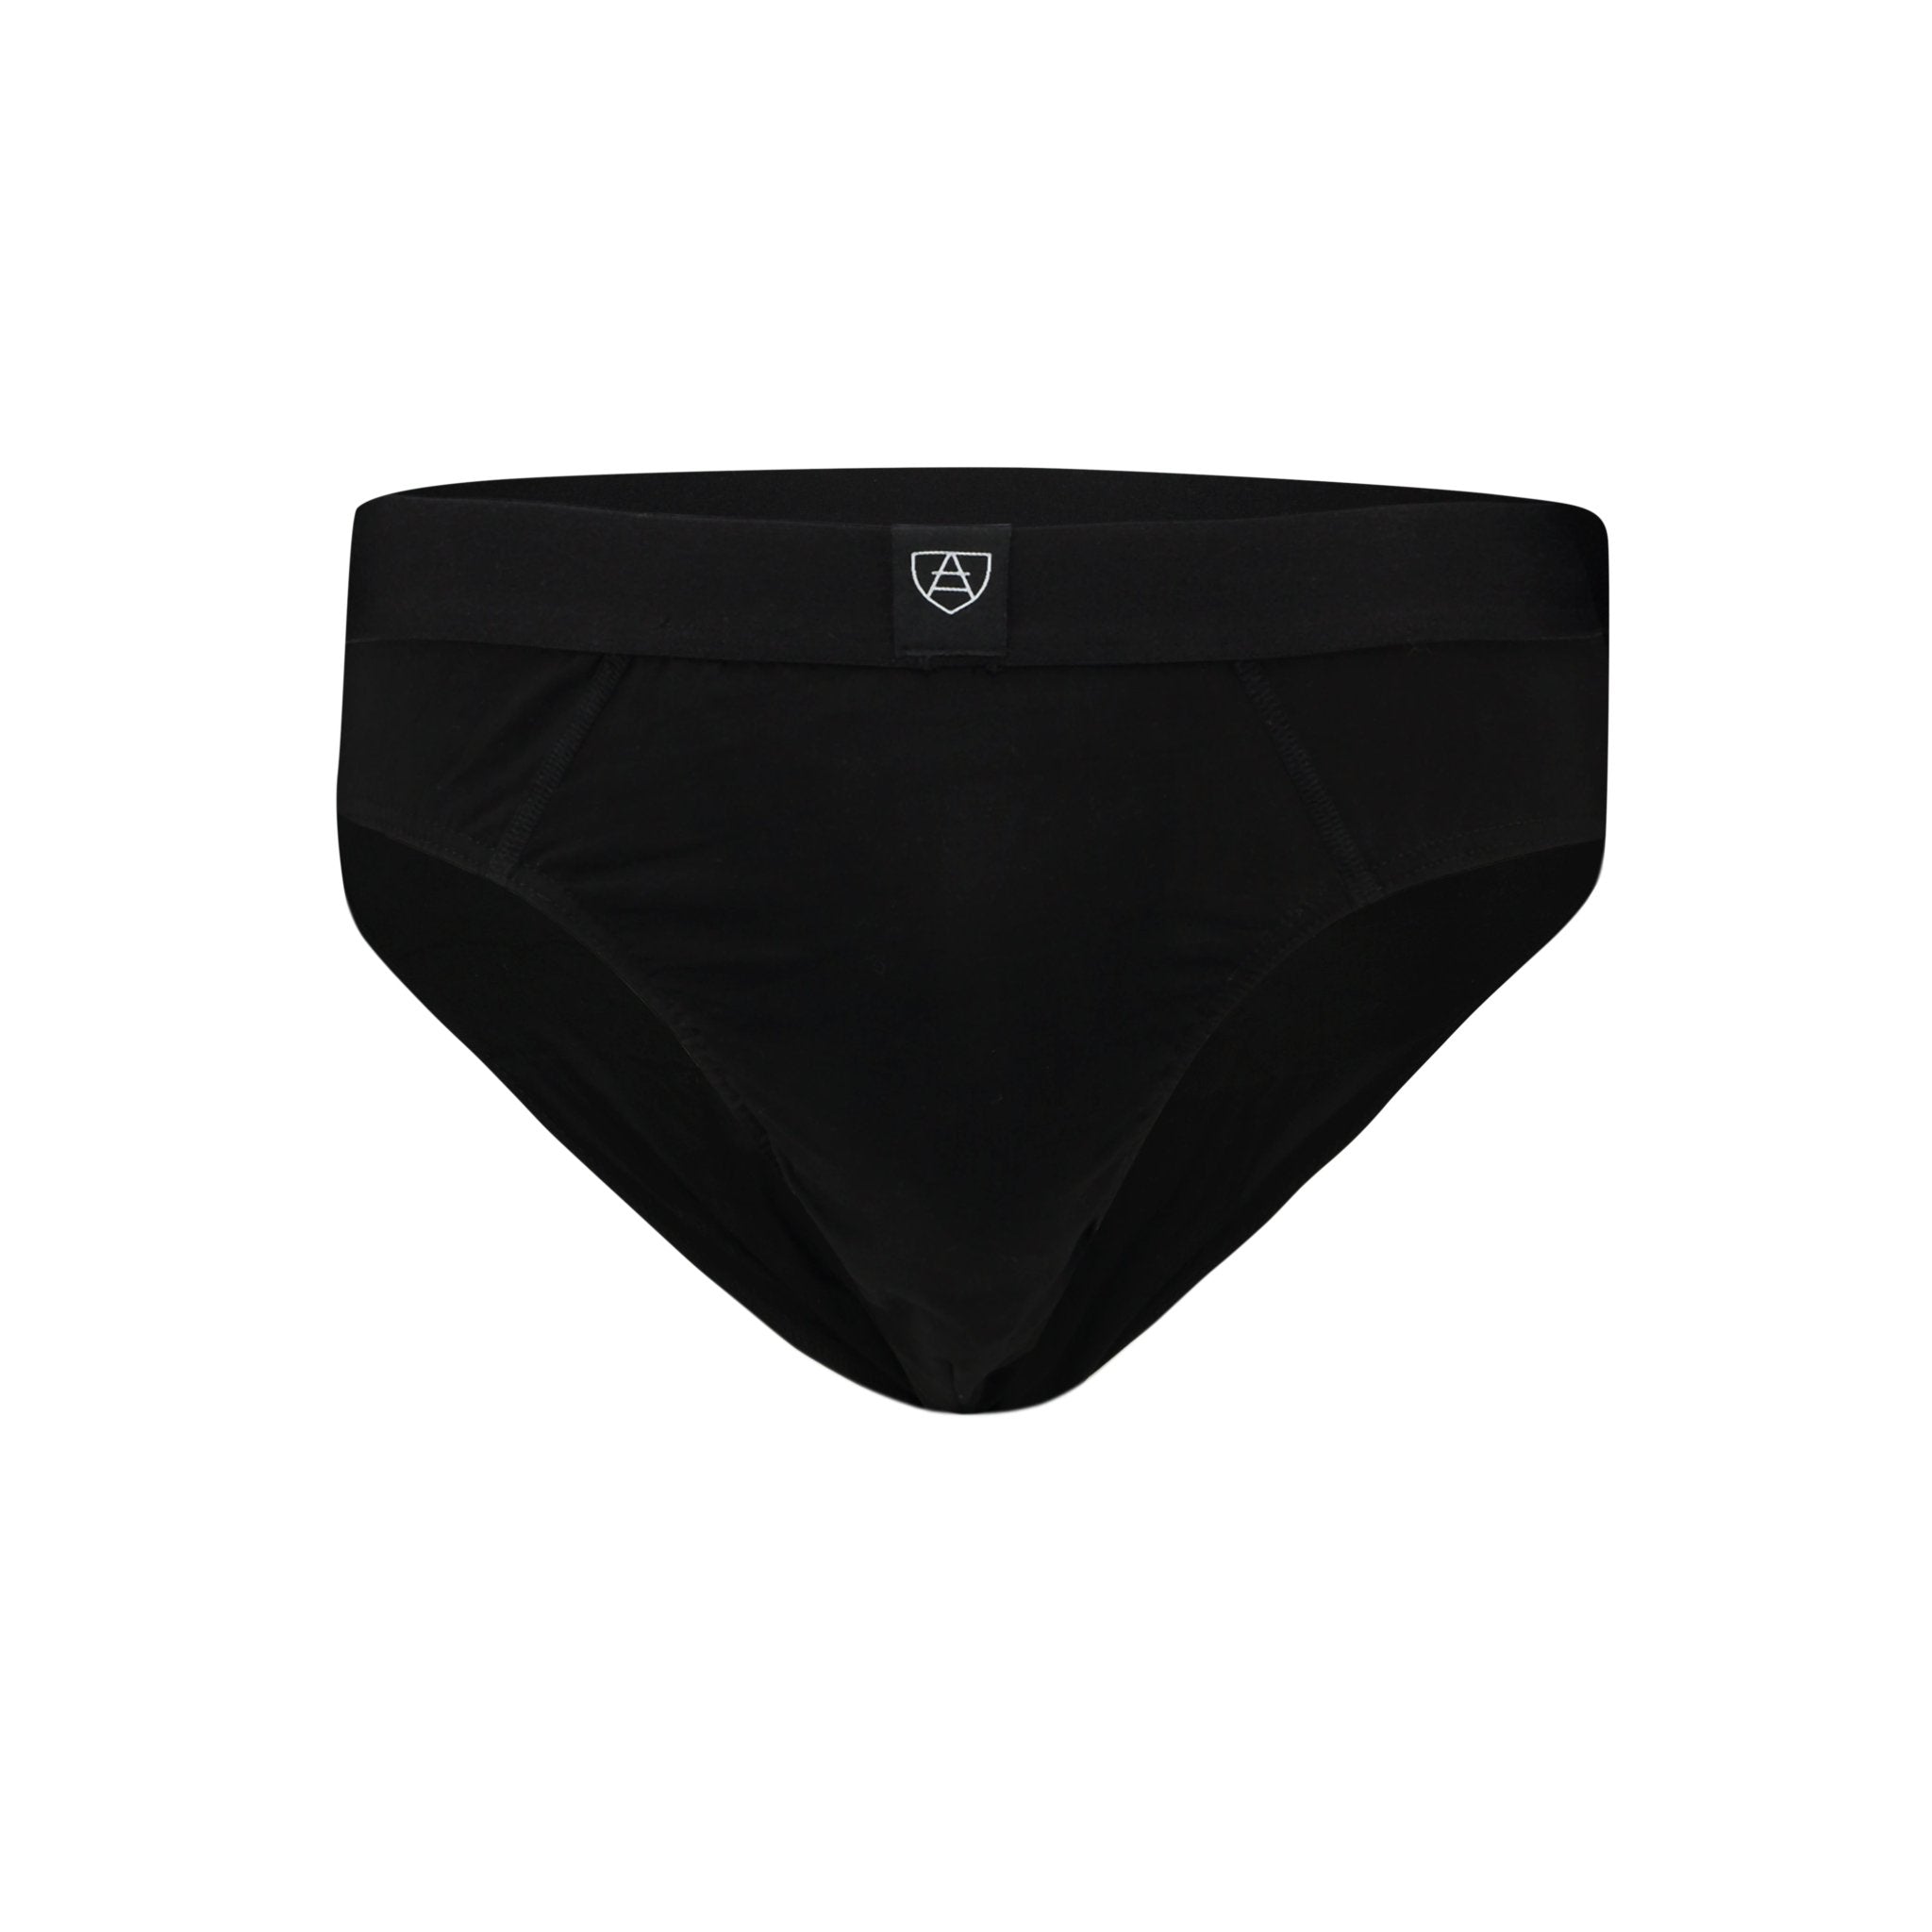 Paxsies Underwear - Our Oliver's All-in-one Packing Boxers come